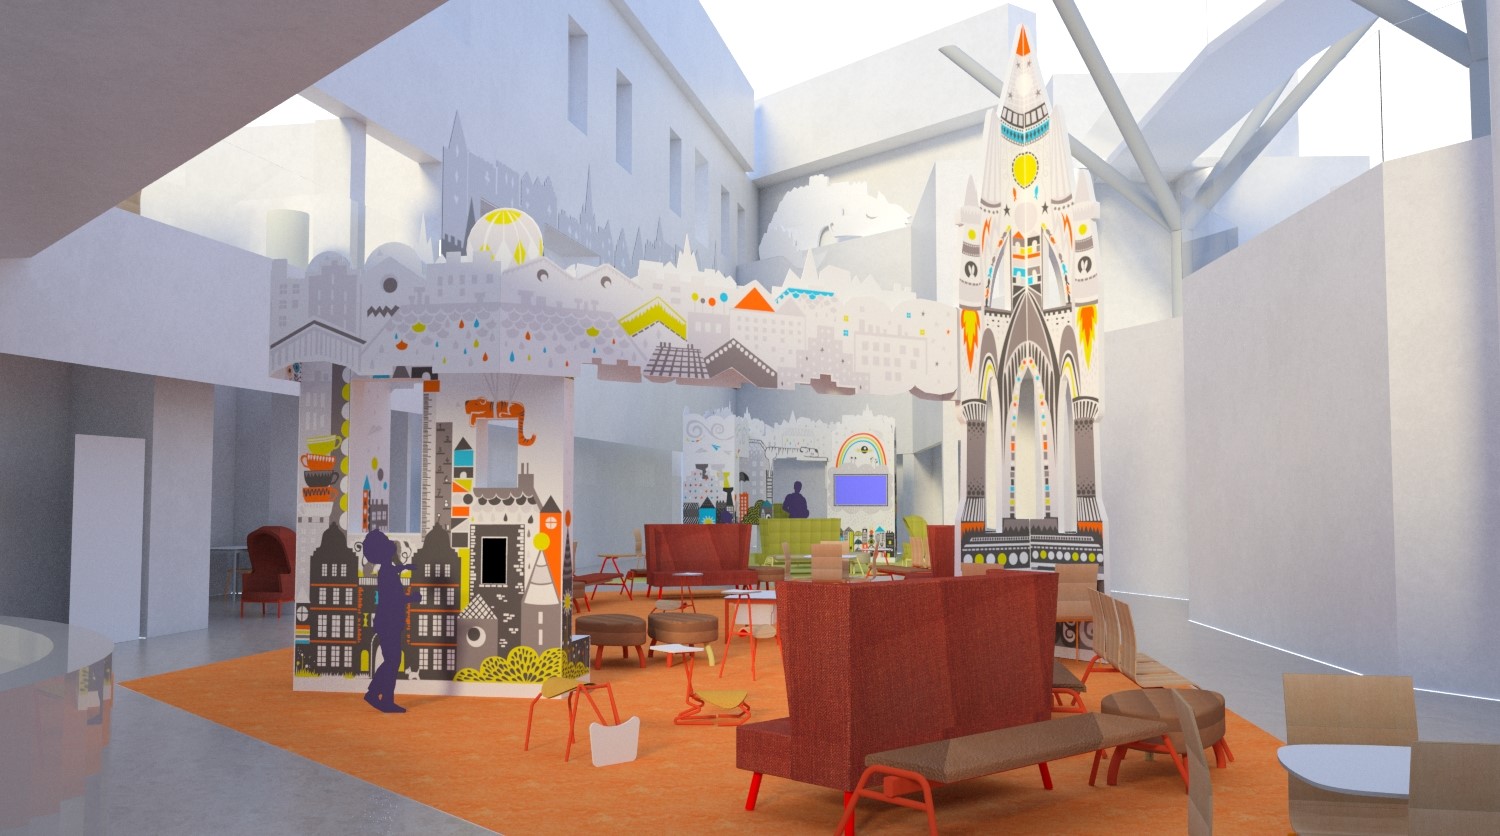 The enhanced design of the play waiting areas across the children's hospital was led by Warren Design